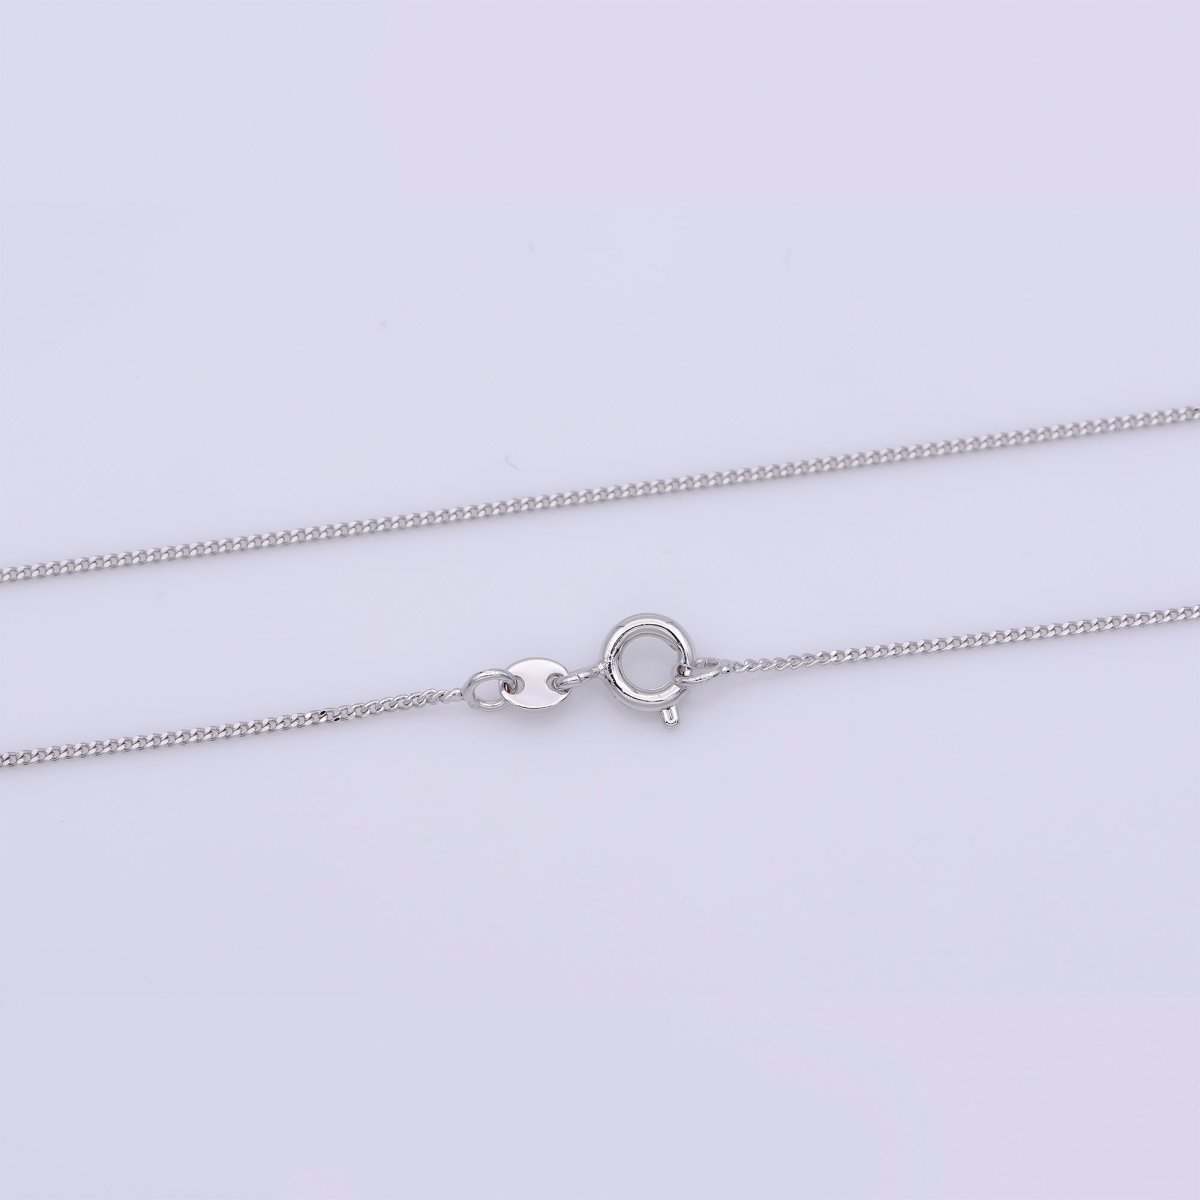 Silver Curb Chain Necklace, Dainty Silver Necklace, Dainty Finished Silver Chain 18 inch 0.8mm Ready to wear Silver Chain | WA-237 Clearance Pricing - DLUXCA